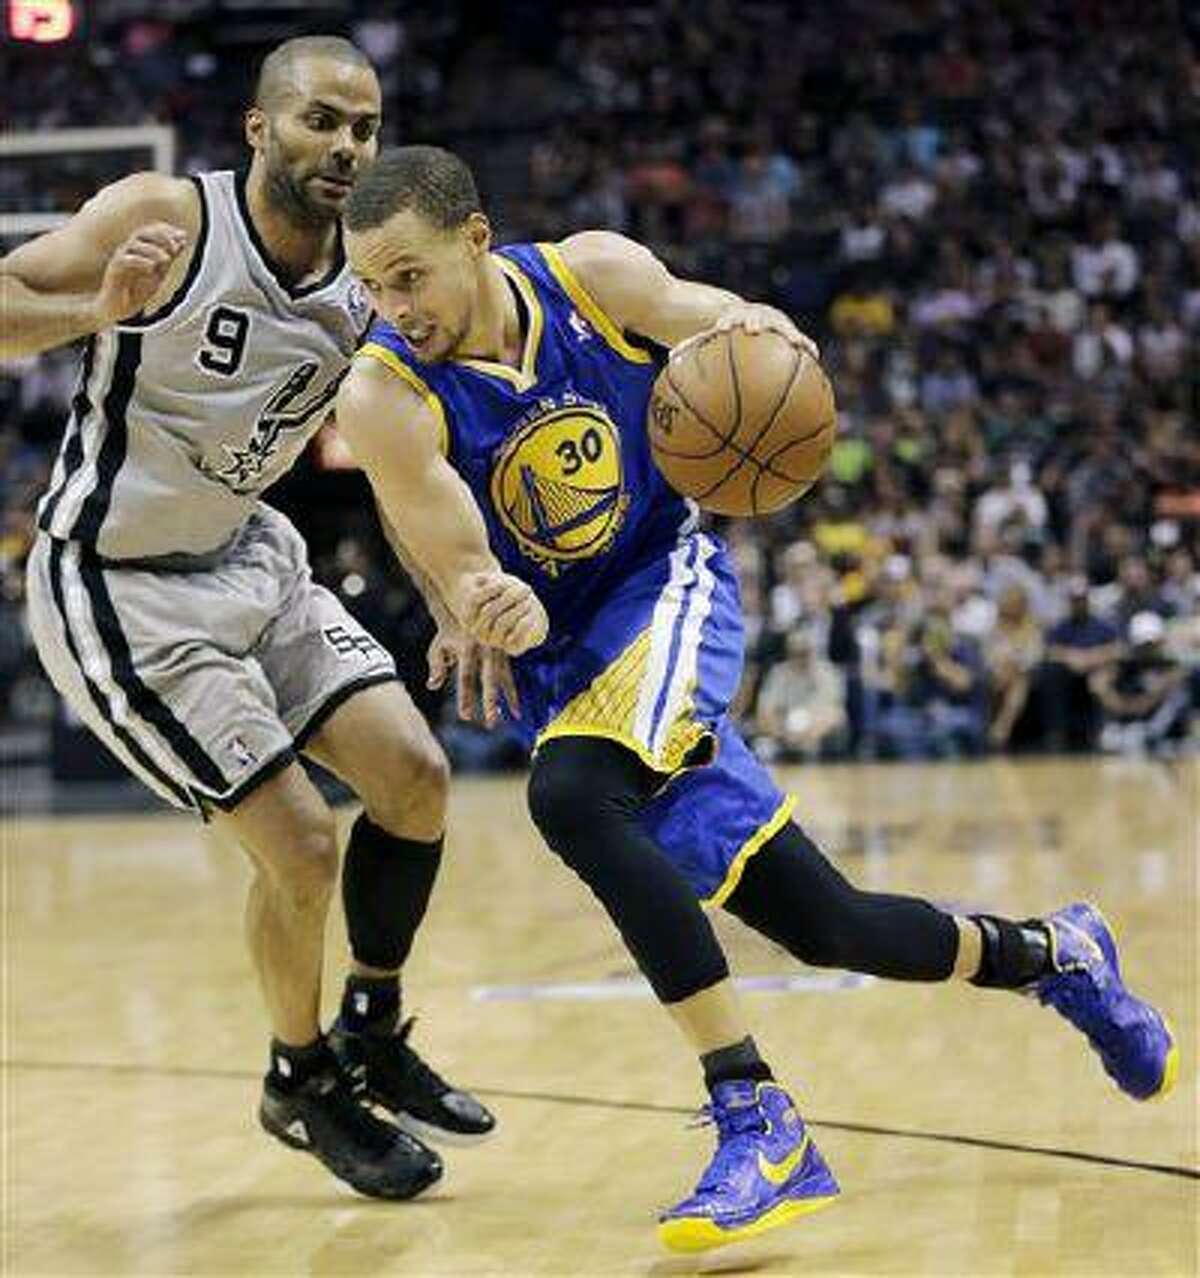 Golden State Warriors' Stephen Curry (30) drives on San Antonio Spurs' Tony Parker (9) during the second half in Game 5, May 14, 2013, in San Antonio.